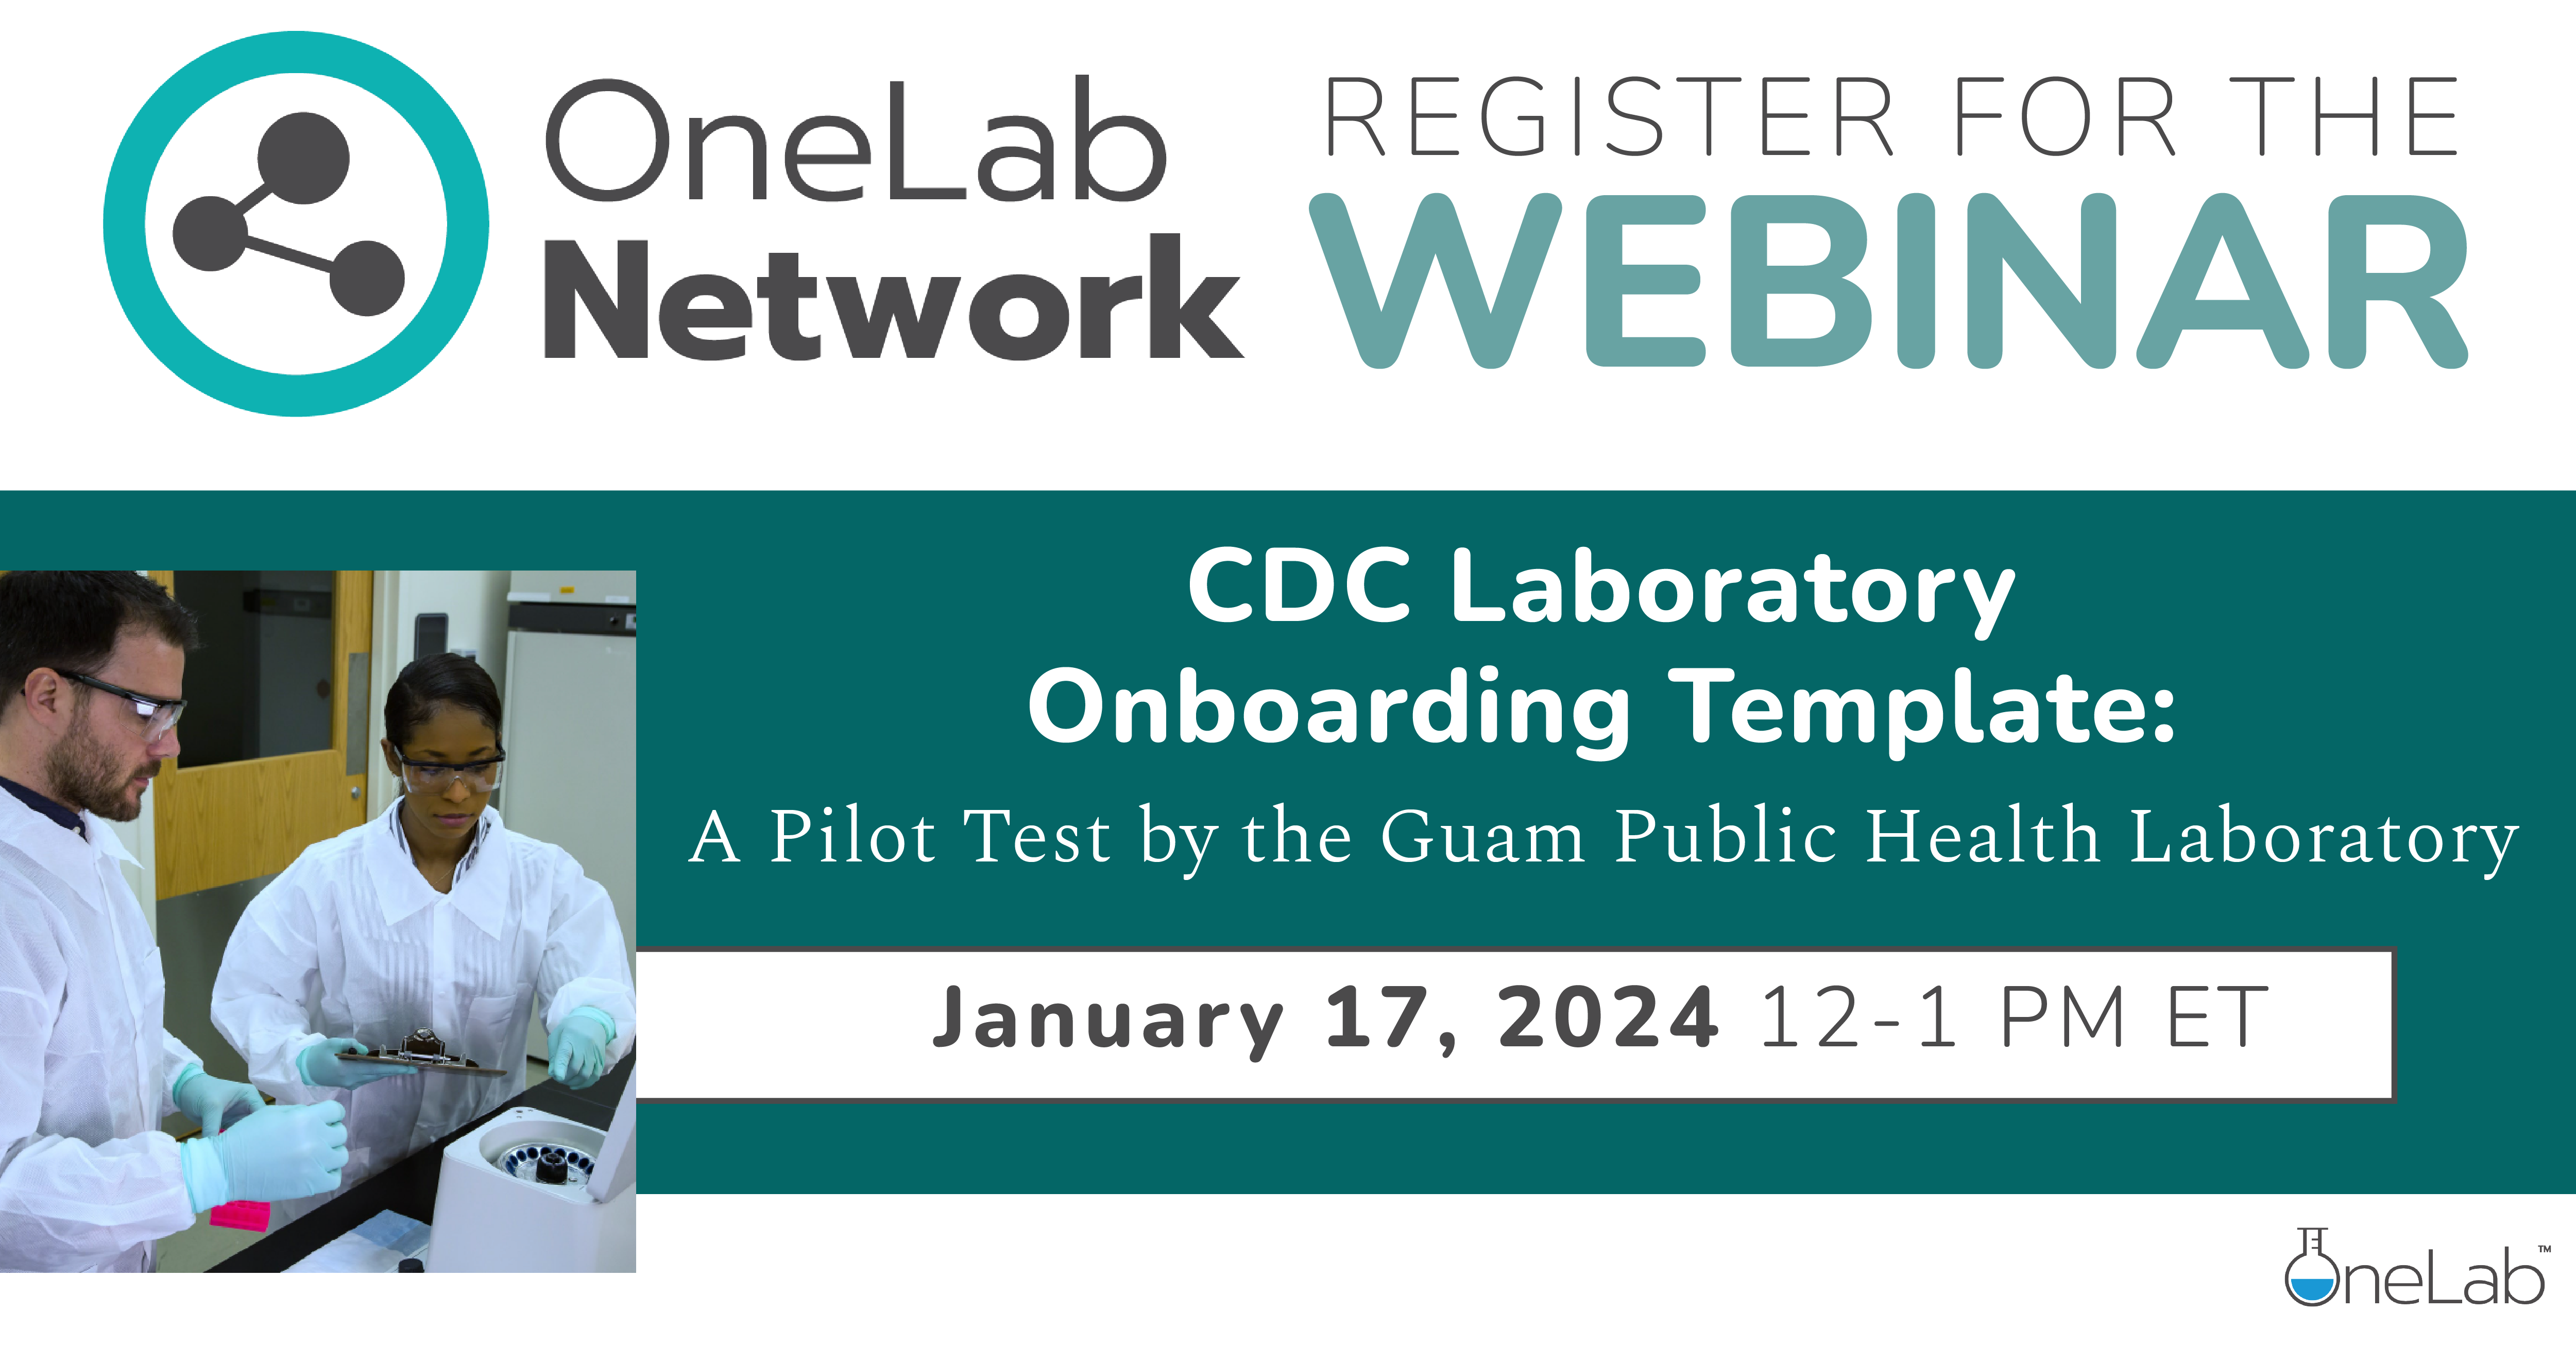 OneLab Network event January 17, 2023